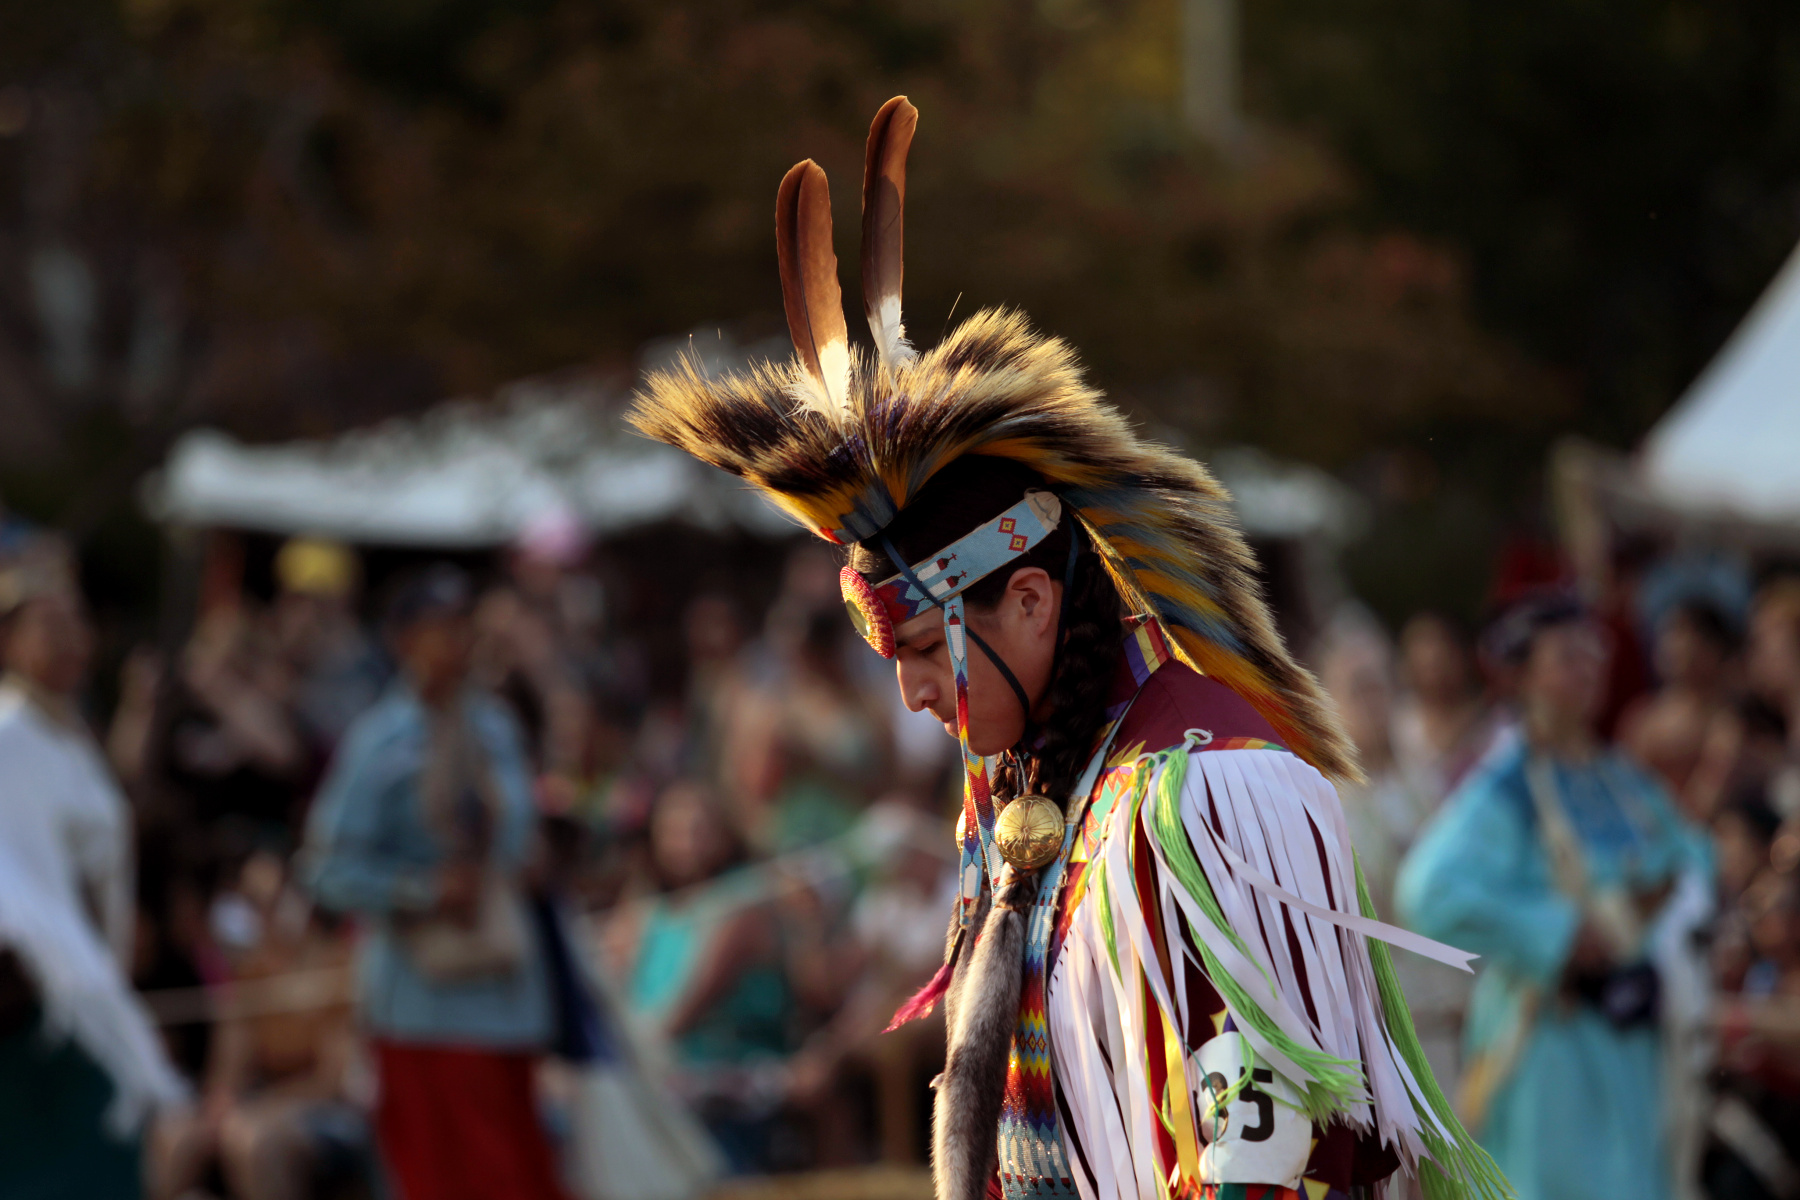 Thunderbird Pow Wow, Queens Farm Park, Queens,  : Parks and People : Photography by Adam Stoltman: Sports Photography, The Arts, Portraiture, Travel, Photojournalism and Fine Art in New York